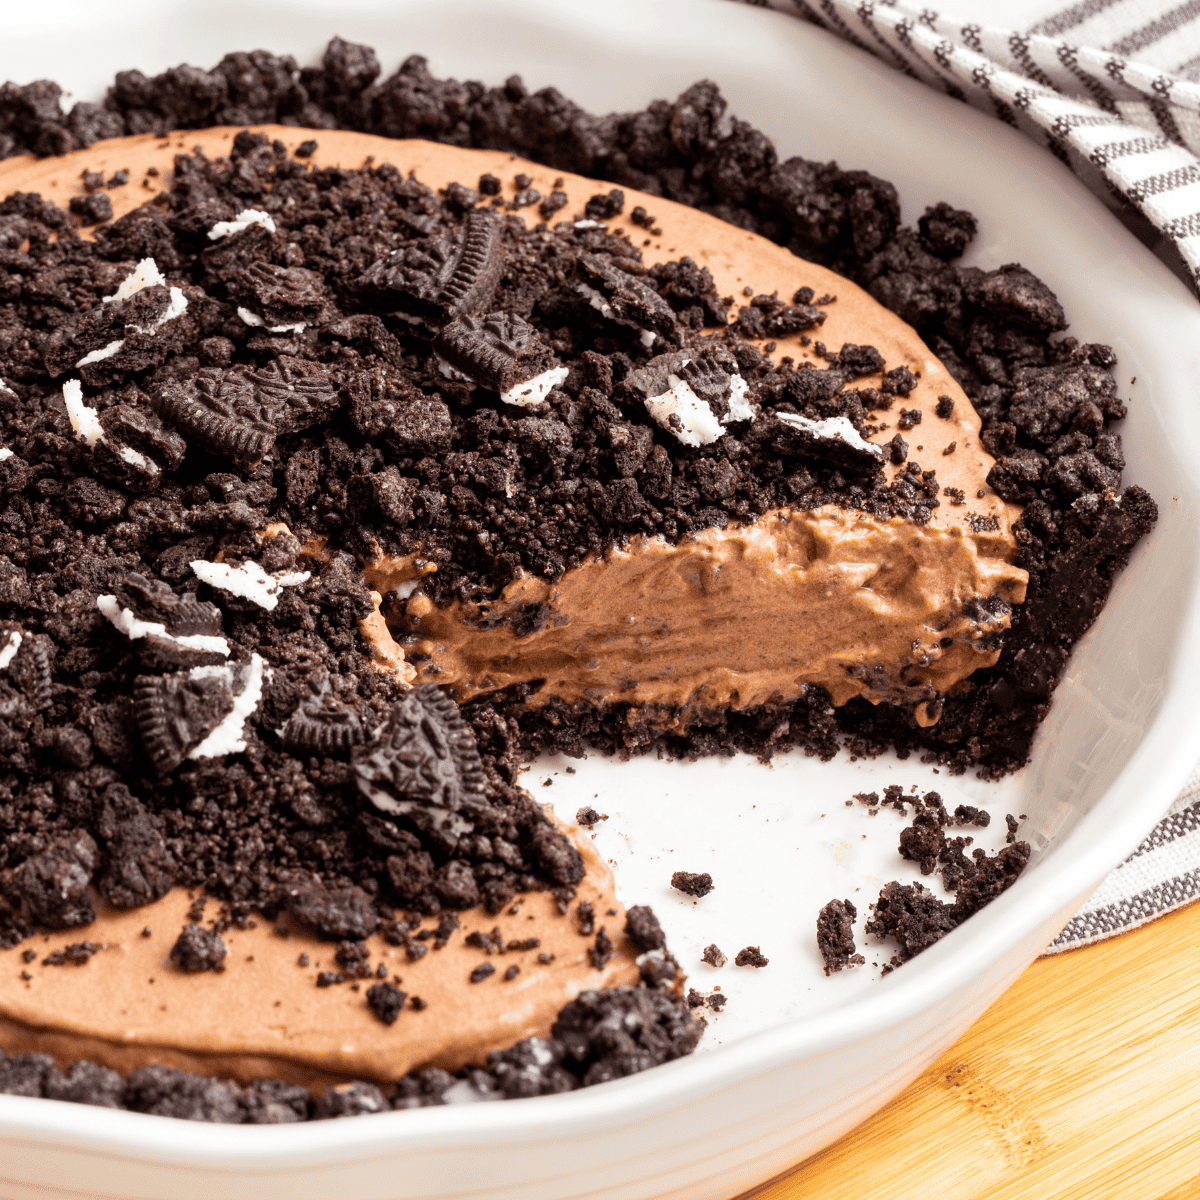 Easy Chocolate Dirt Pie Cups (With Variations!) - On My Kids Plate